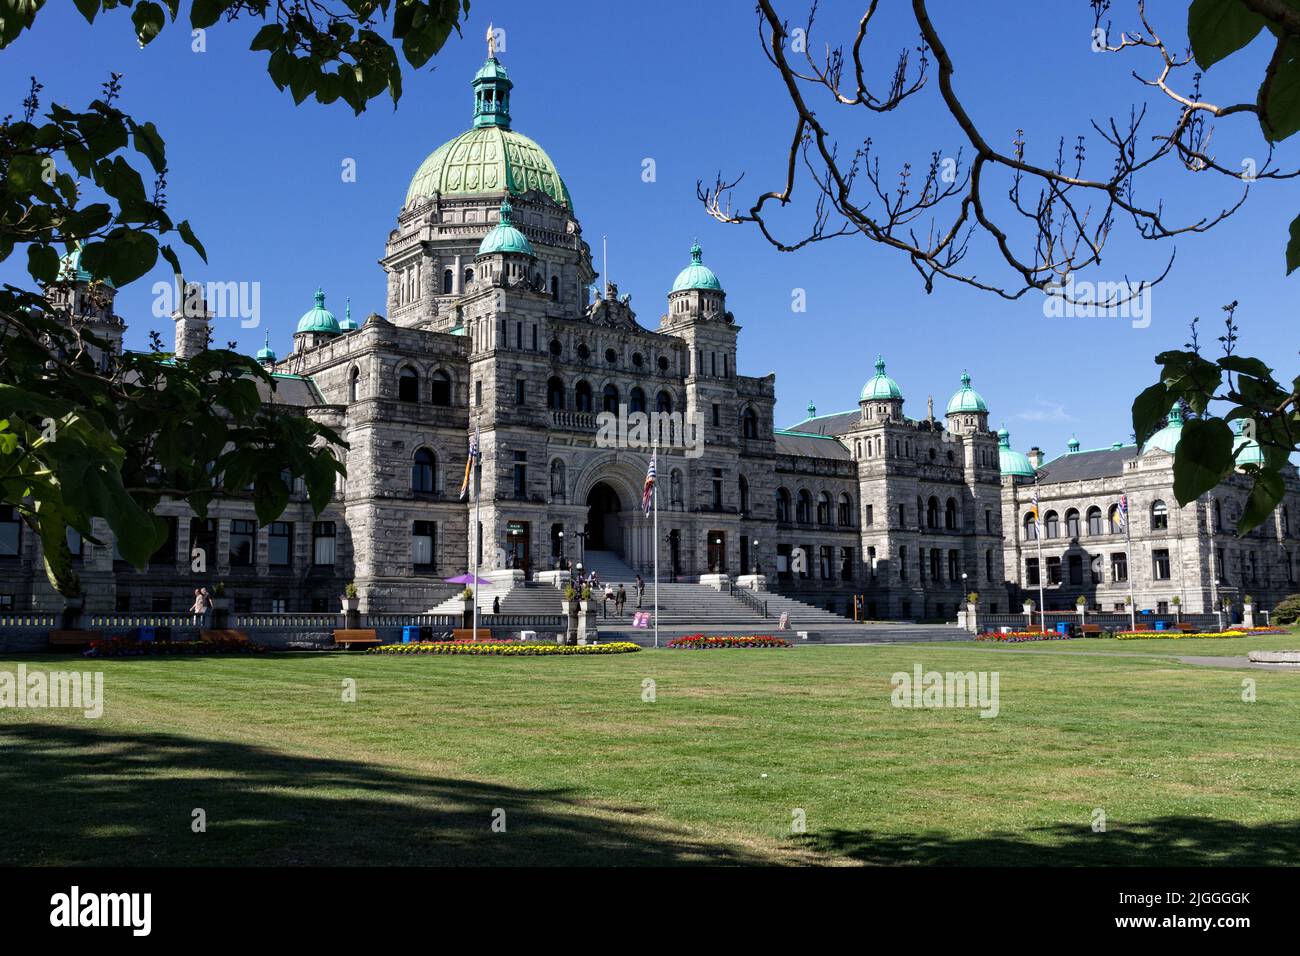 The Legislative Assembly Building in Victoria, British Columbia is photographed from a well shaded area that helps frame the scene and capture detail. Stock Photo